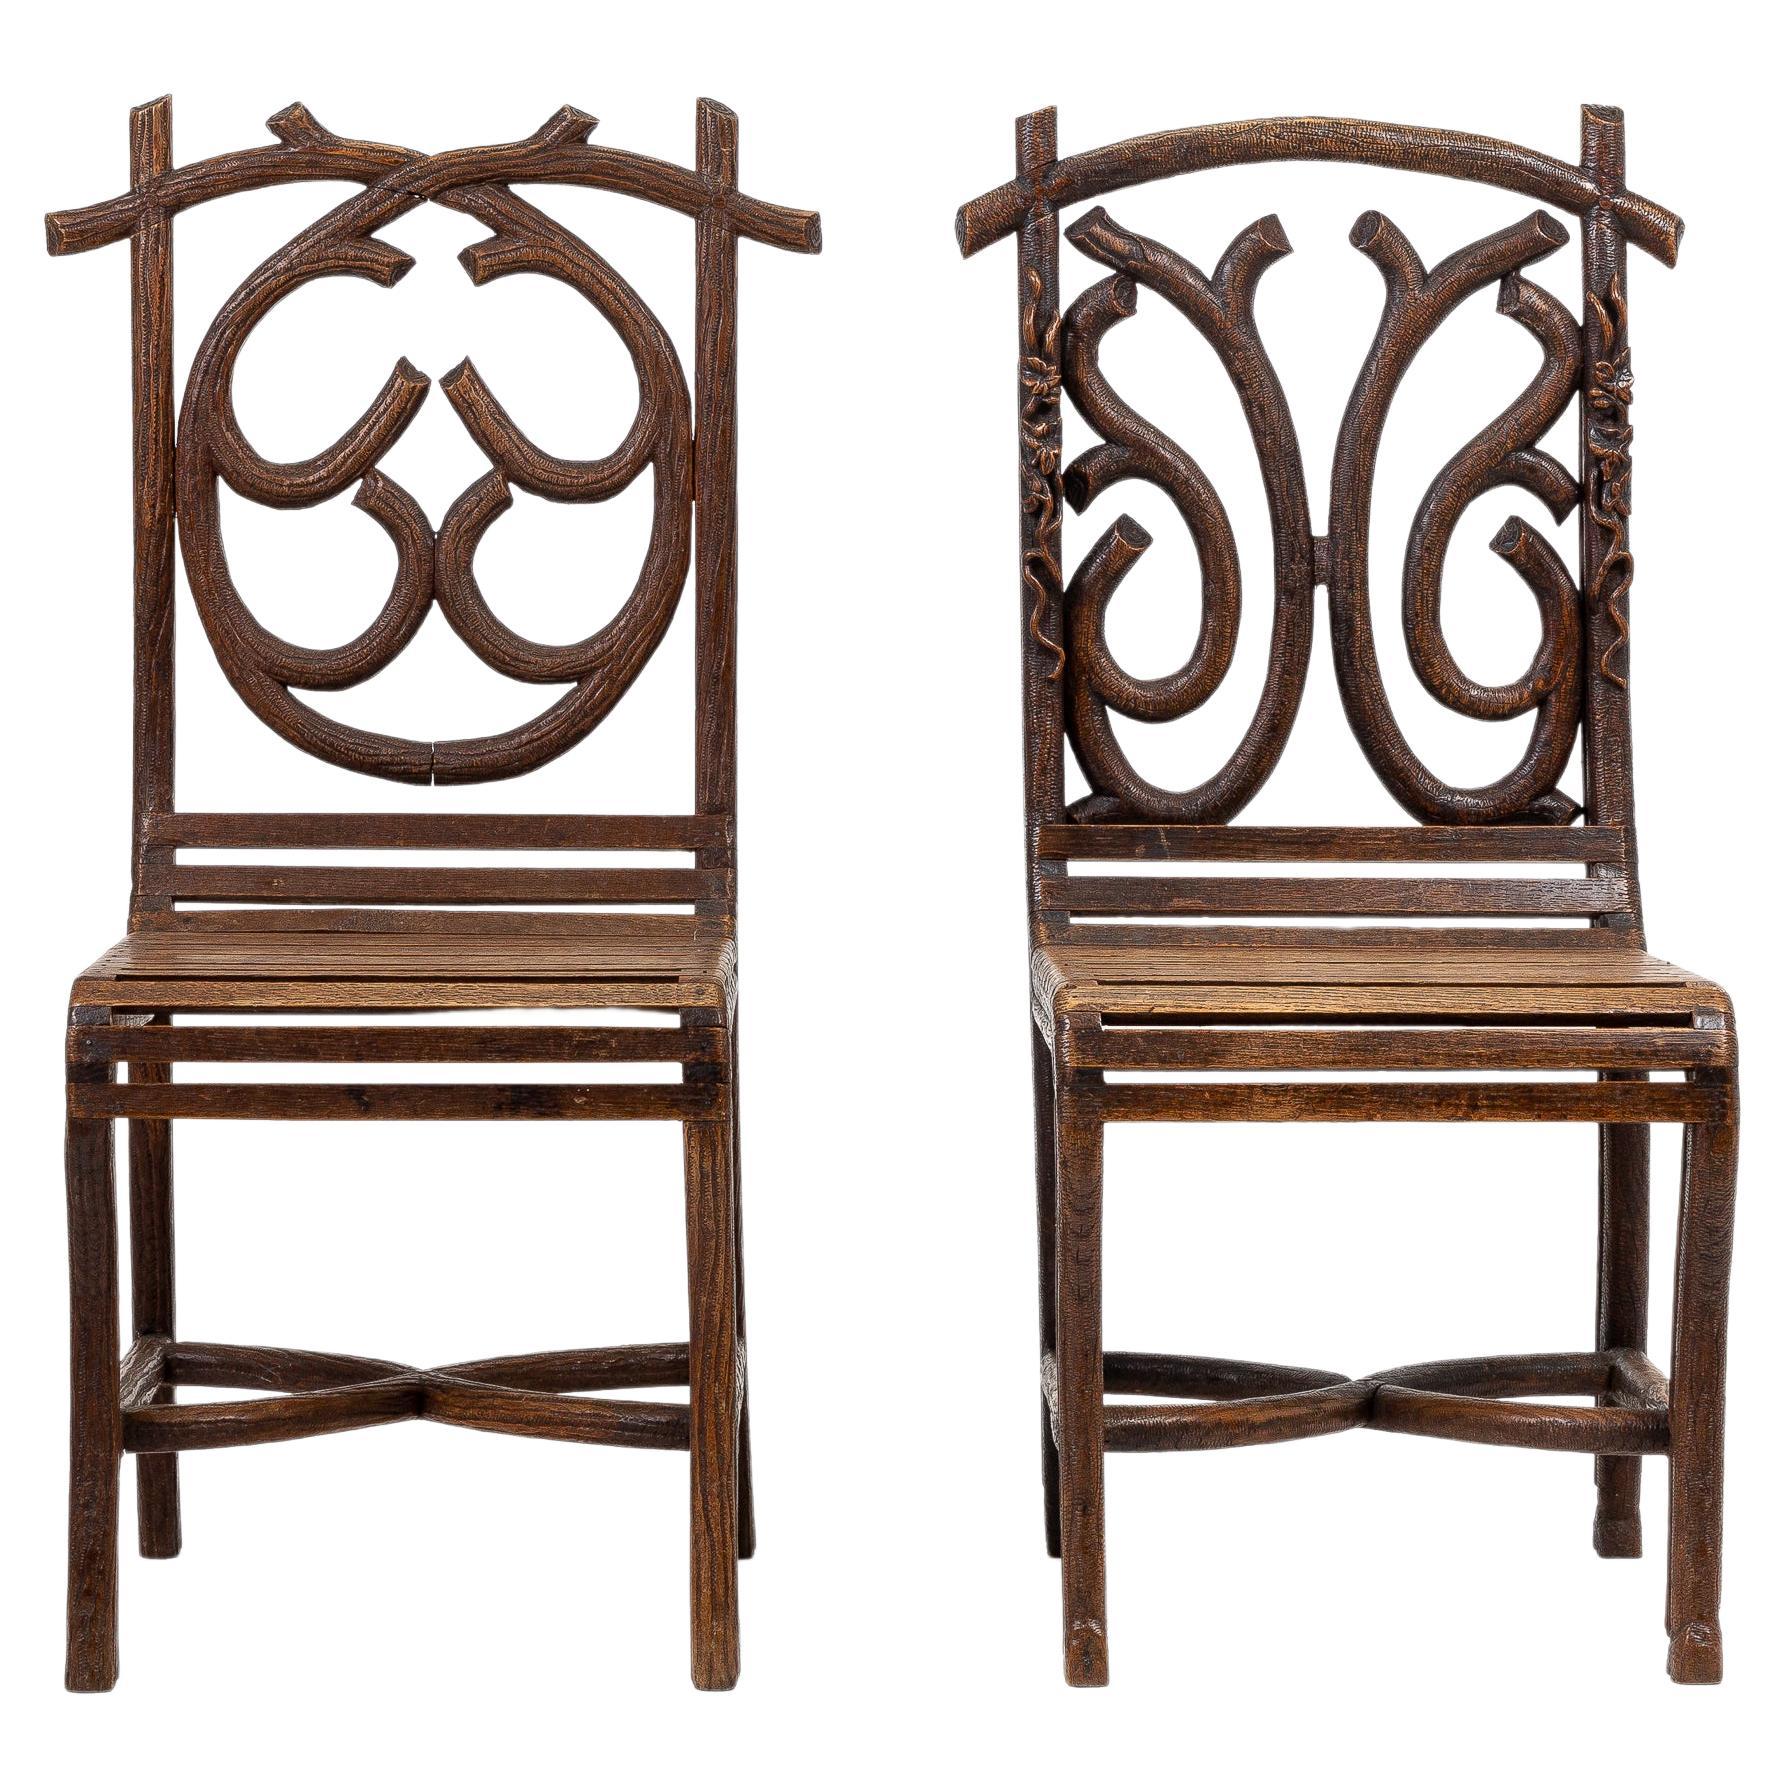 Pair of 19th Century Carved Linden Wood Chairs